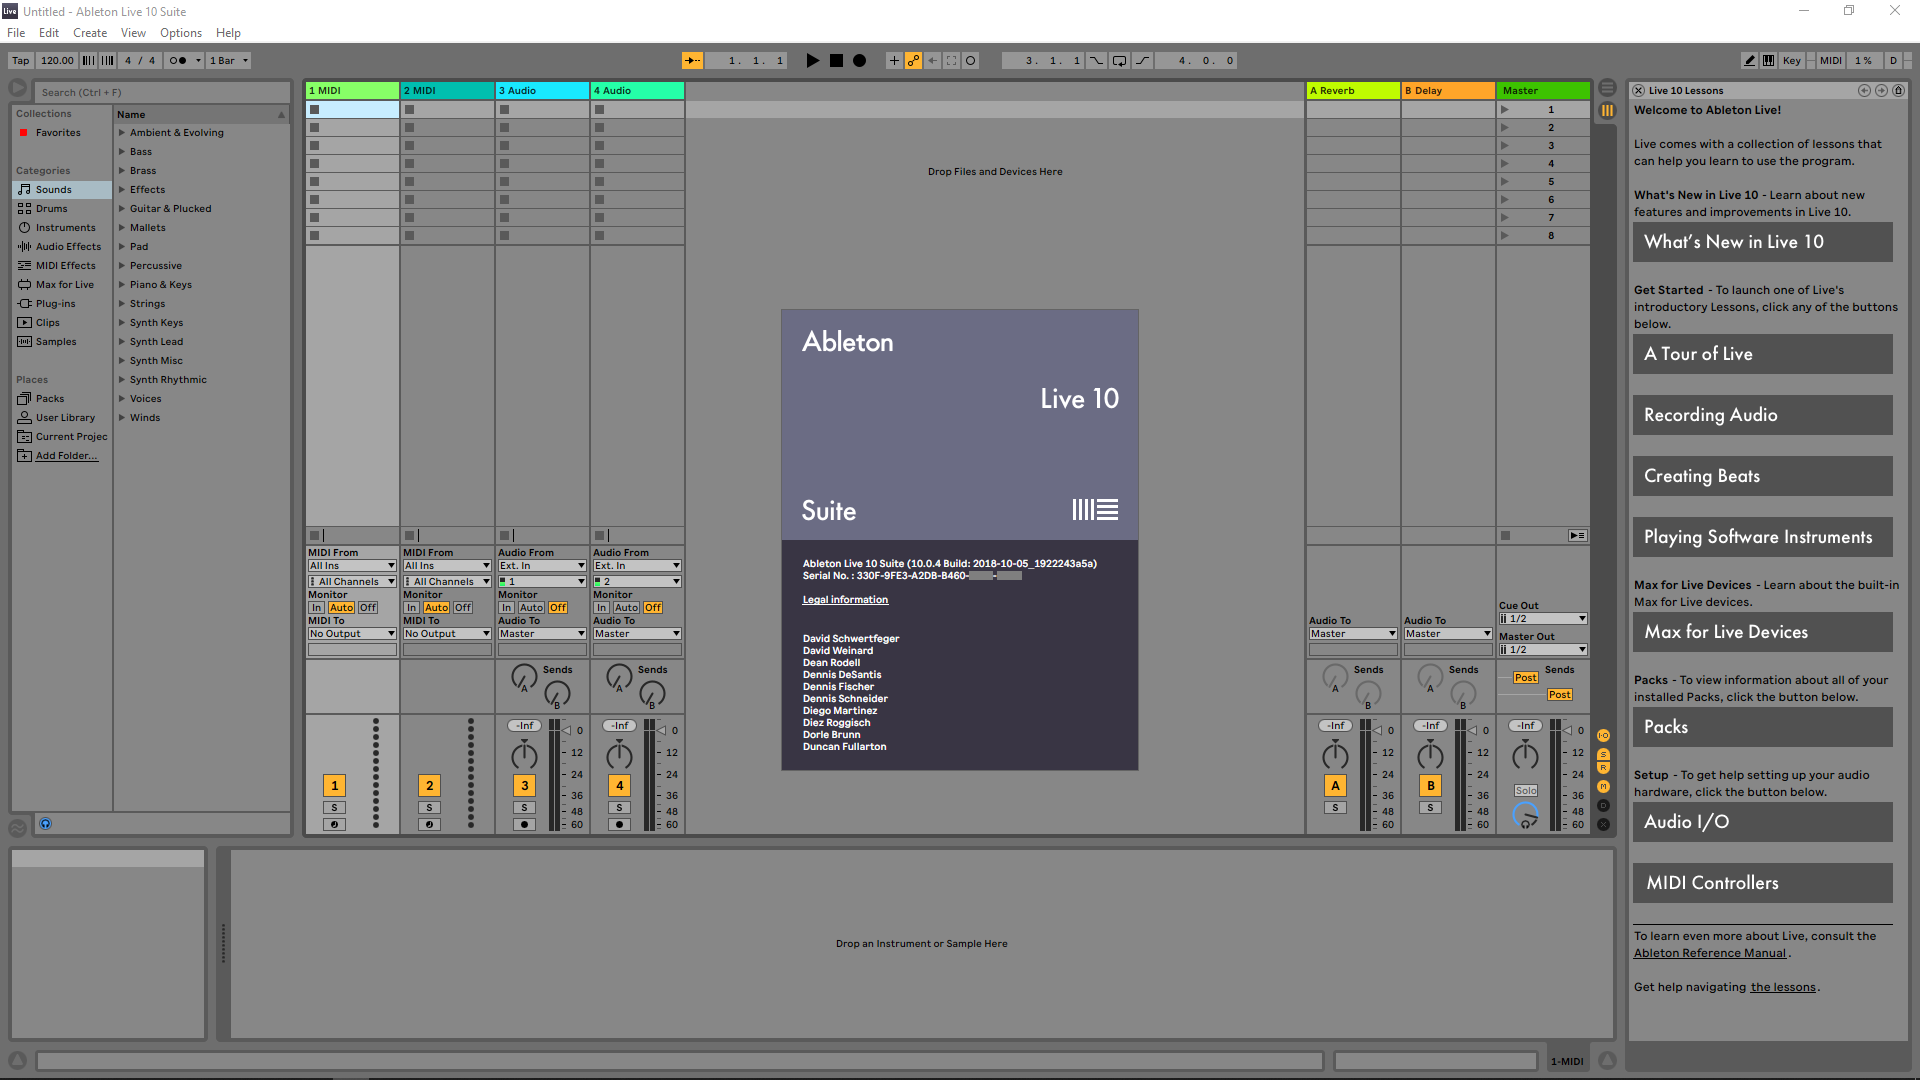 download the last version for ipod Ableton Live Suite 11.3.13